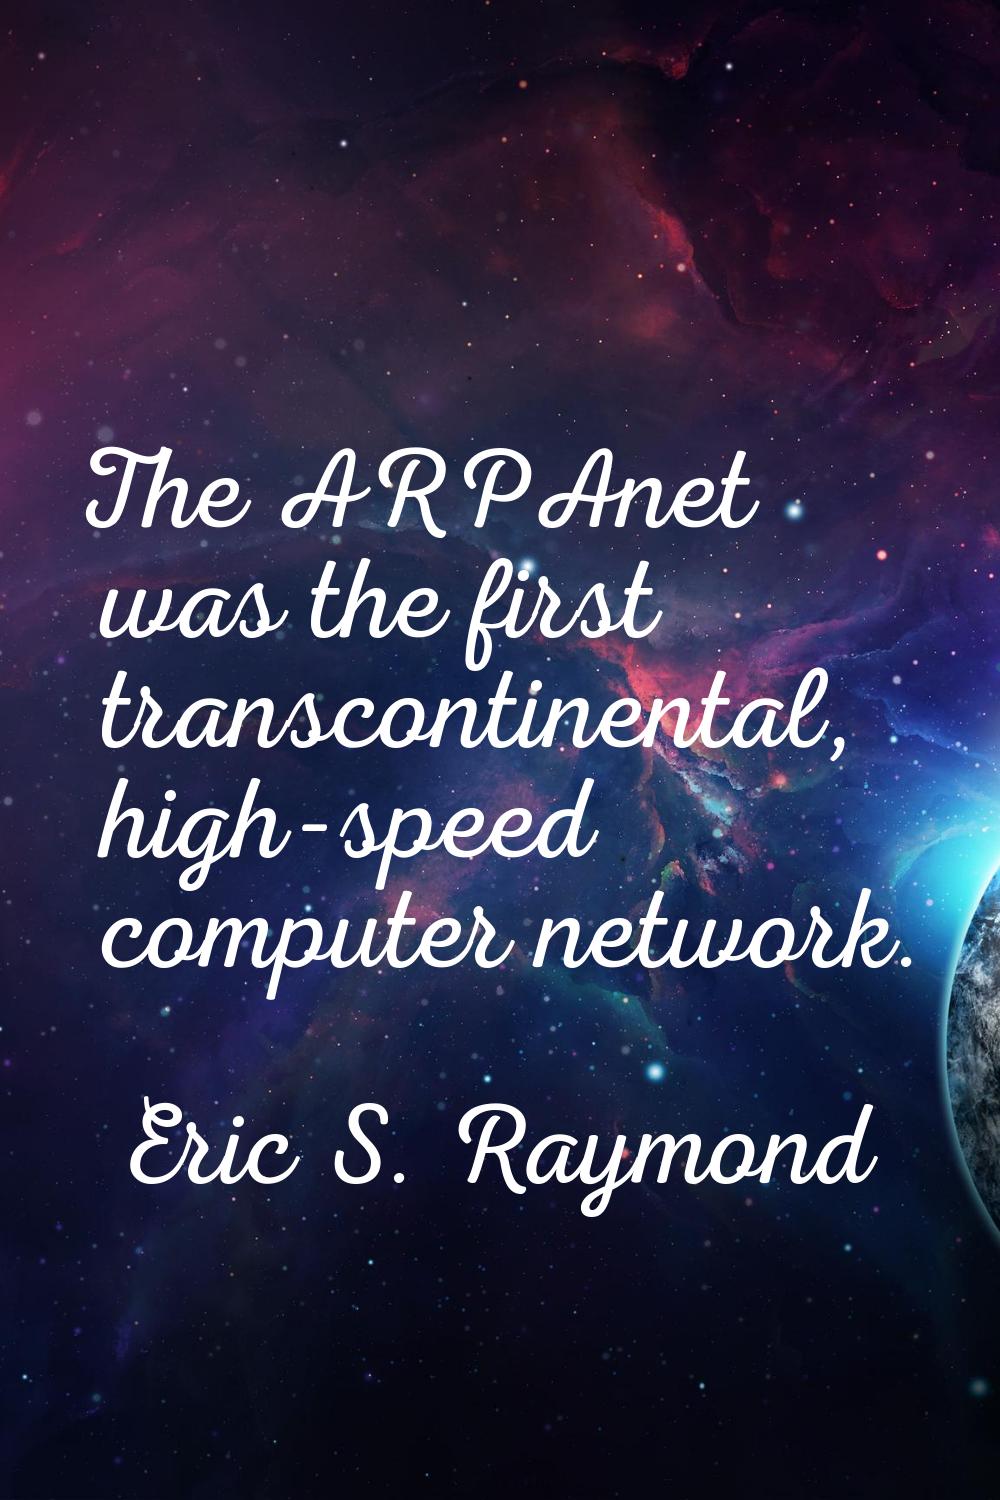 The ARPAnet was the first transcontinental, high-speed computer network.